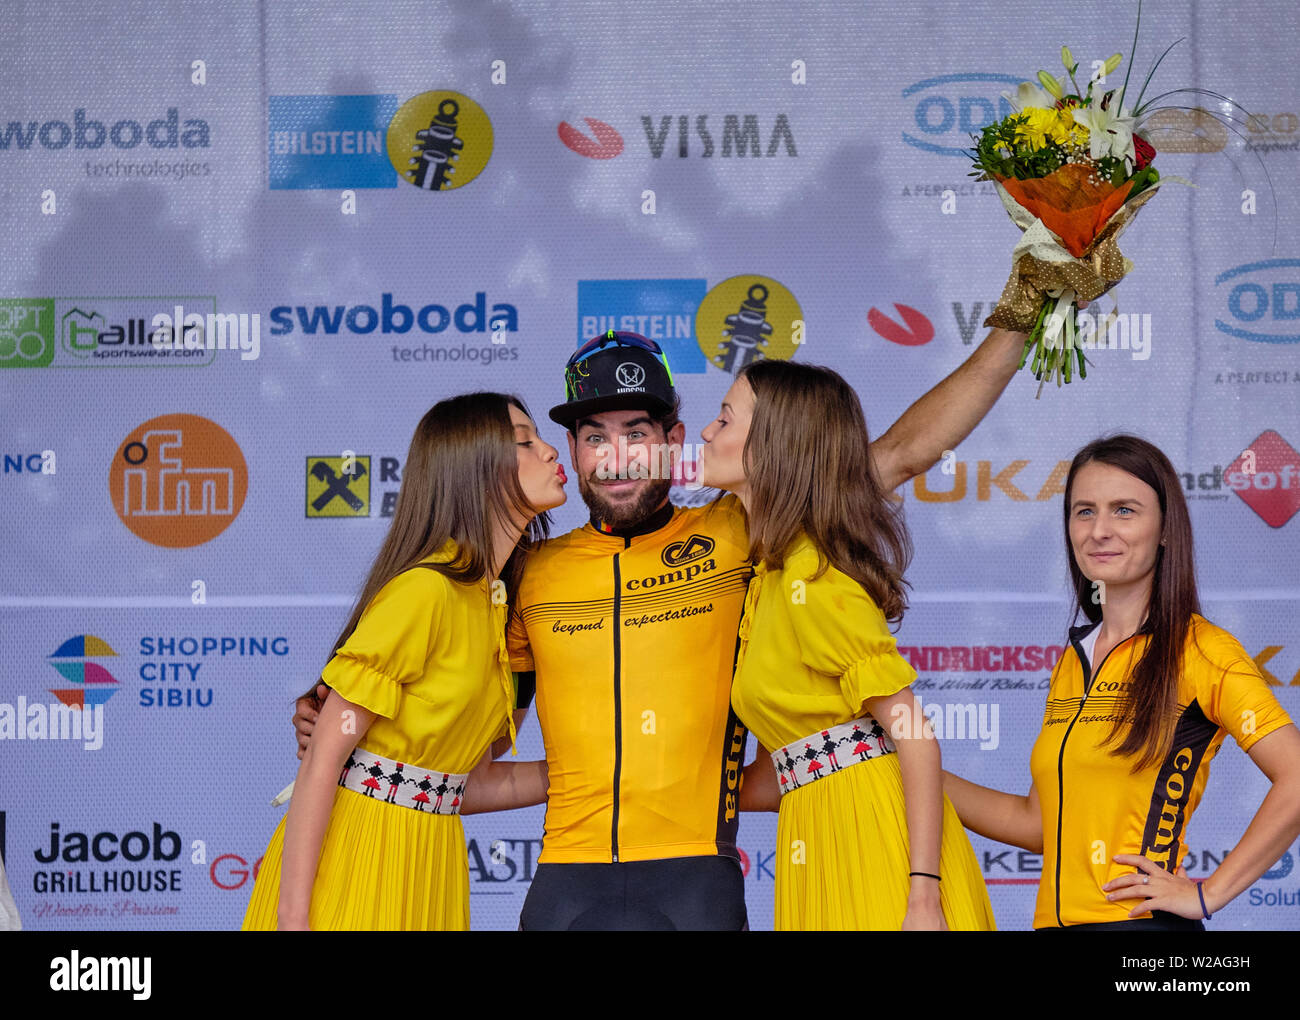 Award ceremony of Cyclist Riccardo Stacchiotti (Team Giotti Victoria– Palomar) winner of the 4th stage of the Sibiu Cycling Tour, Romania, July 7,2019 Stock Photo